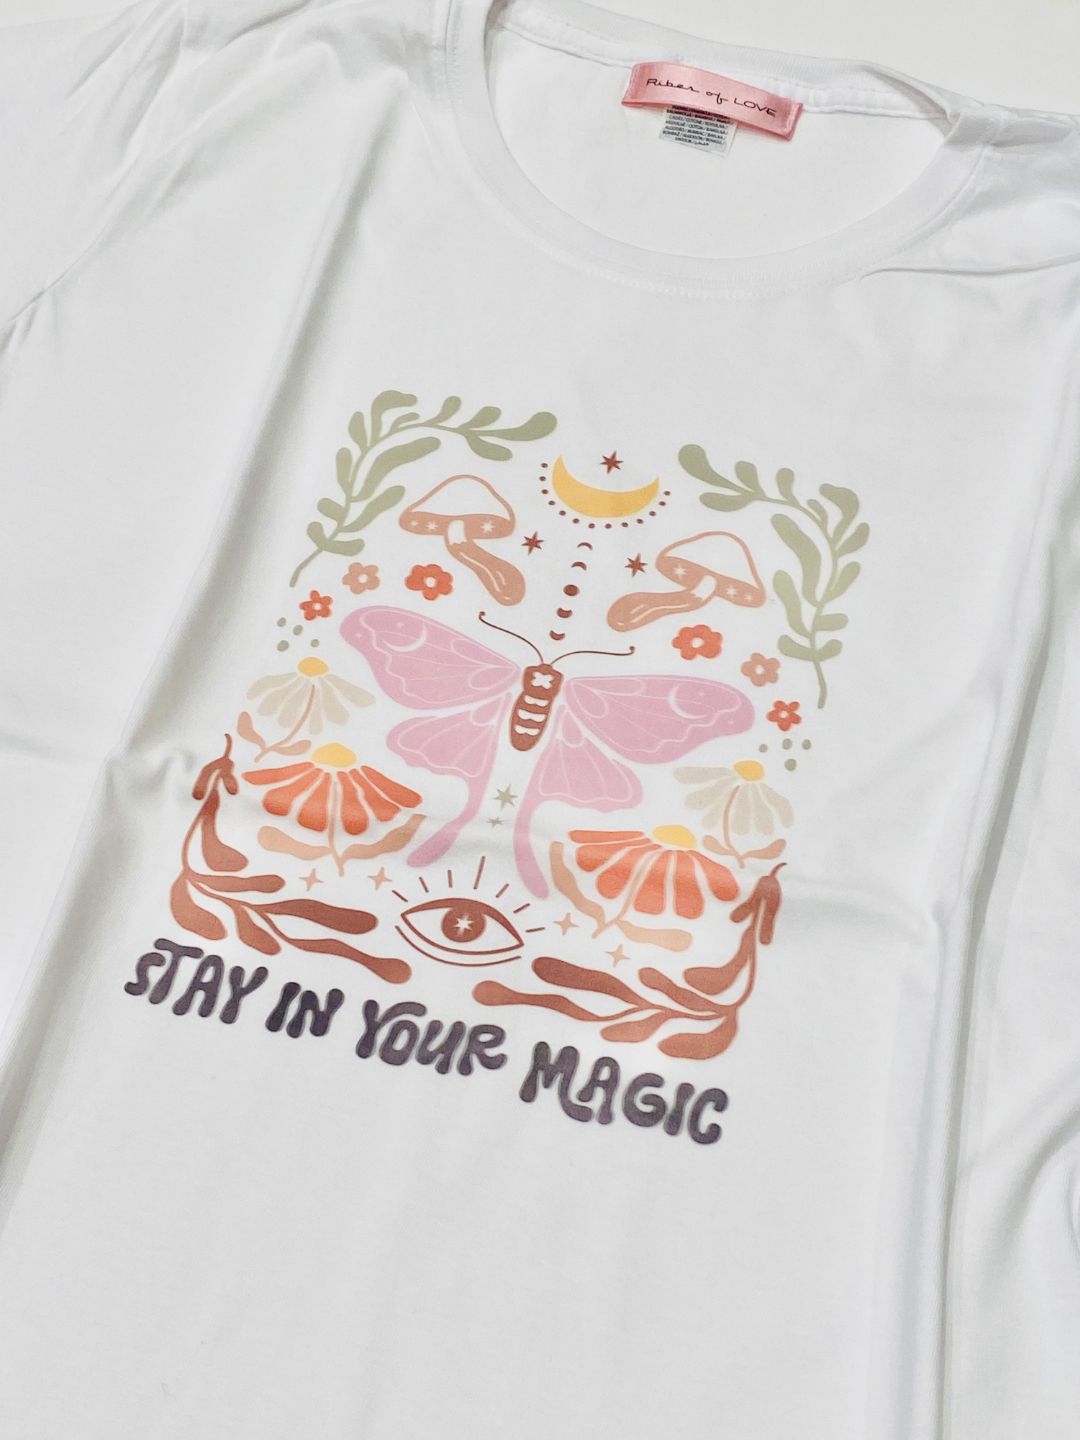 T-SHIRT STAY IN YOUR MAGIC Ribes of LOVE